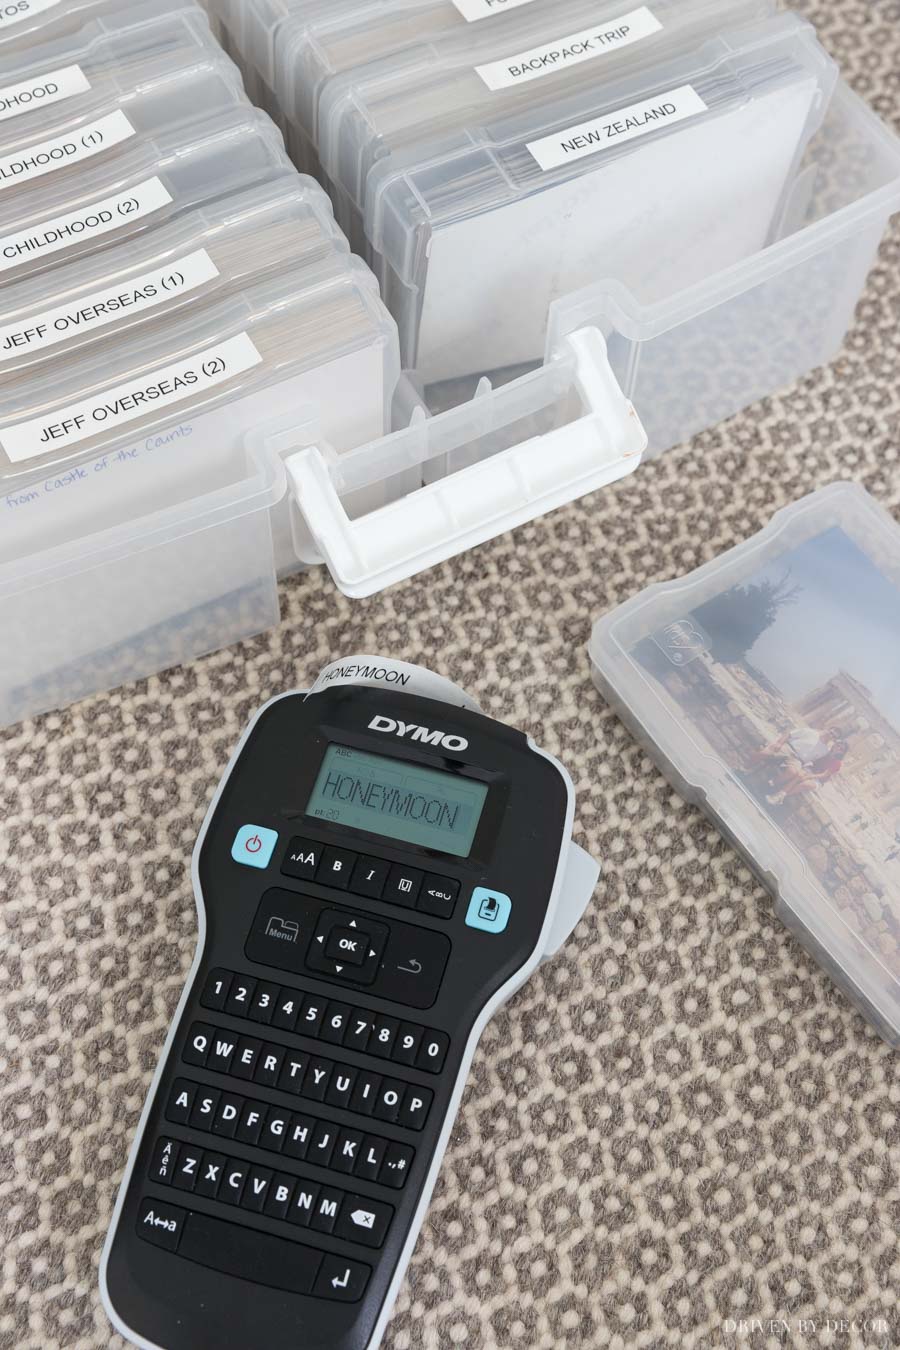 This labeler was so useful for my photo storage project!